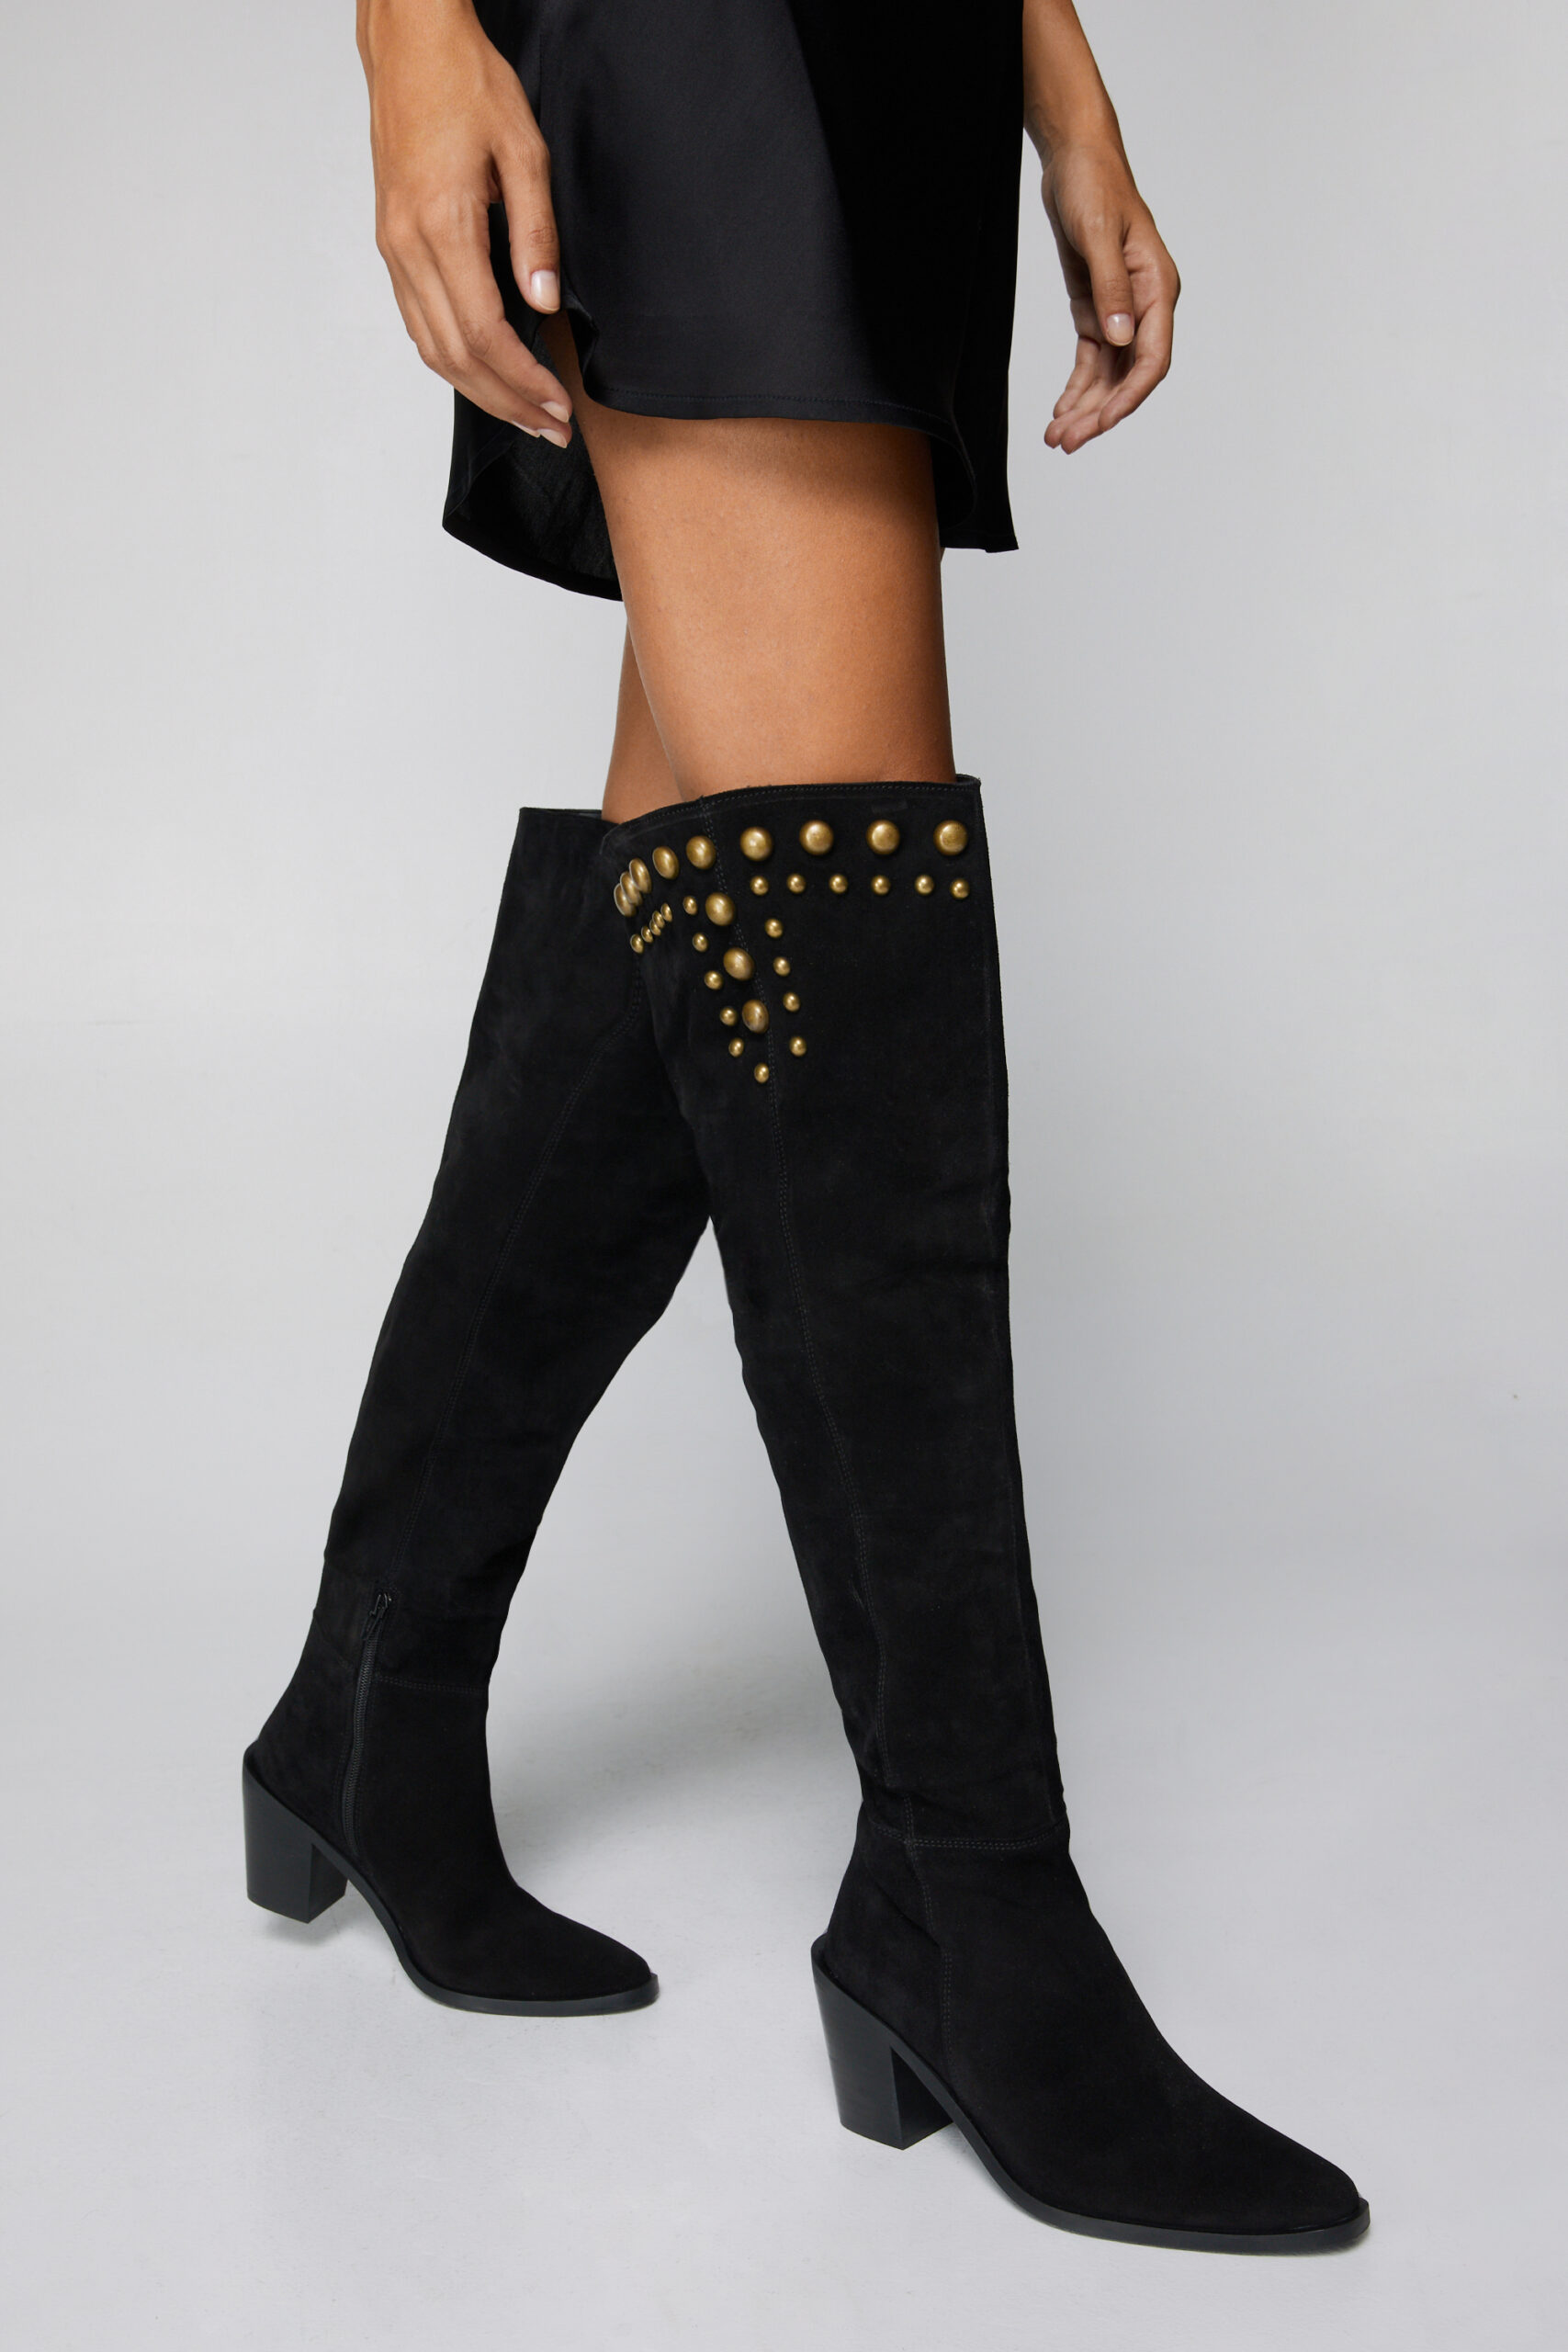 Real Suede Slouchy Studded Thigh High Boots